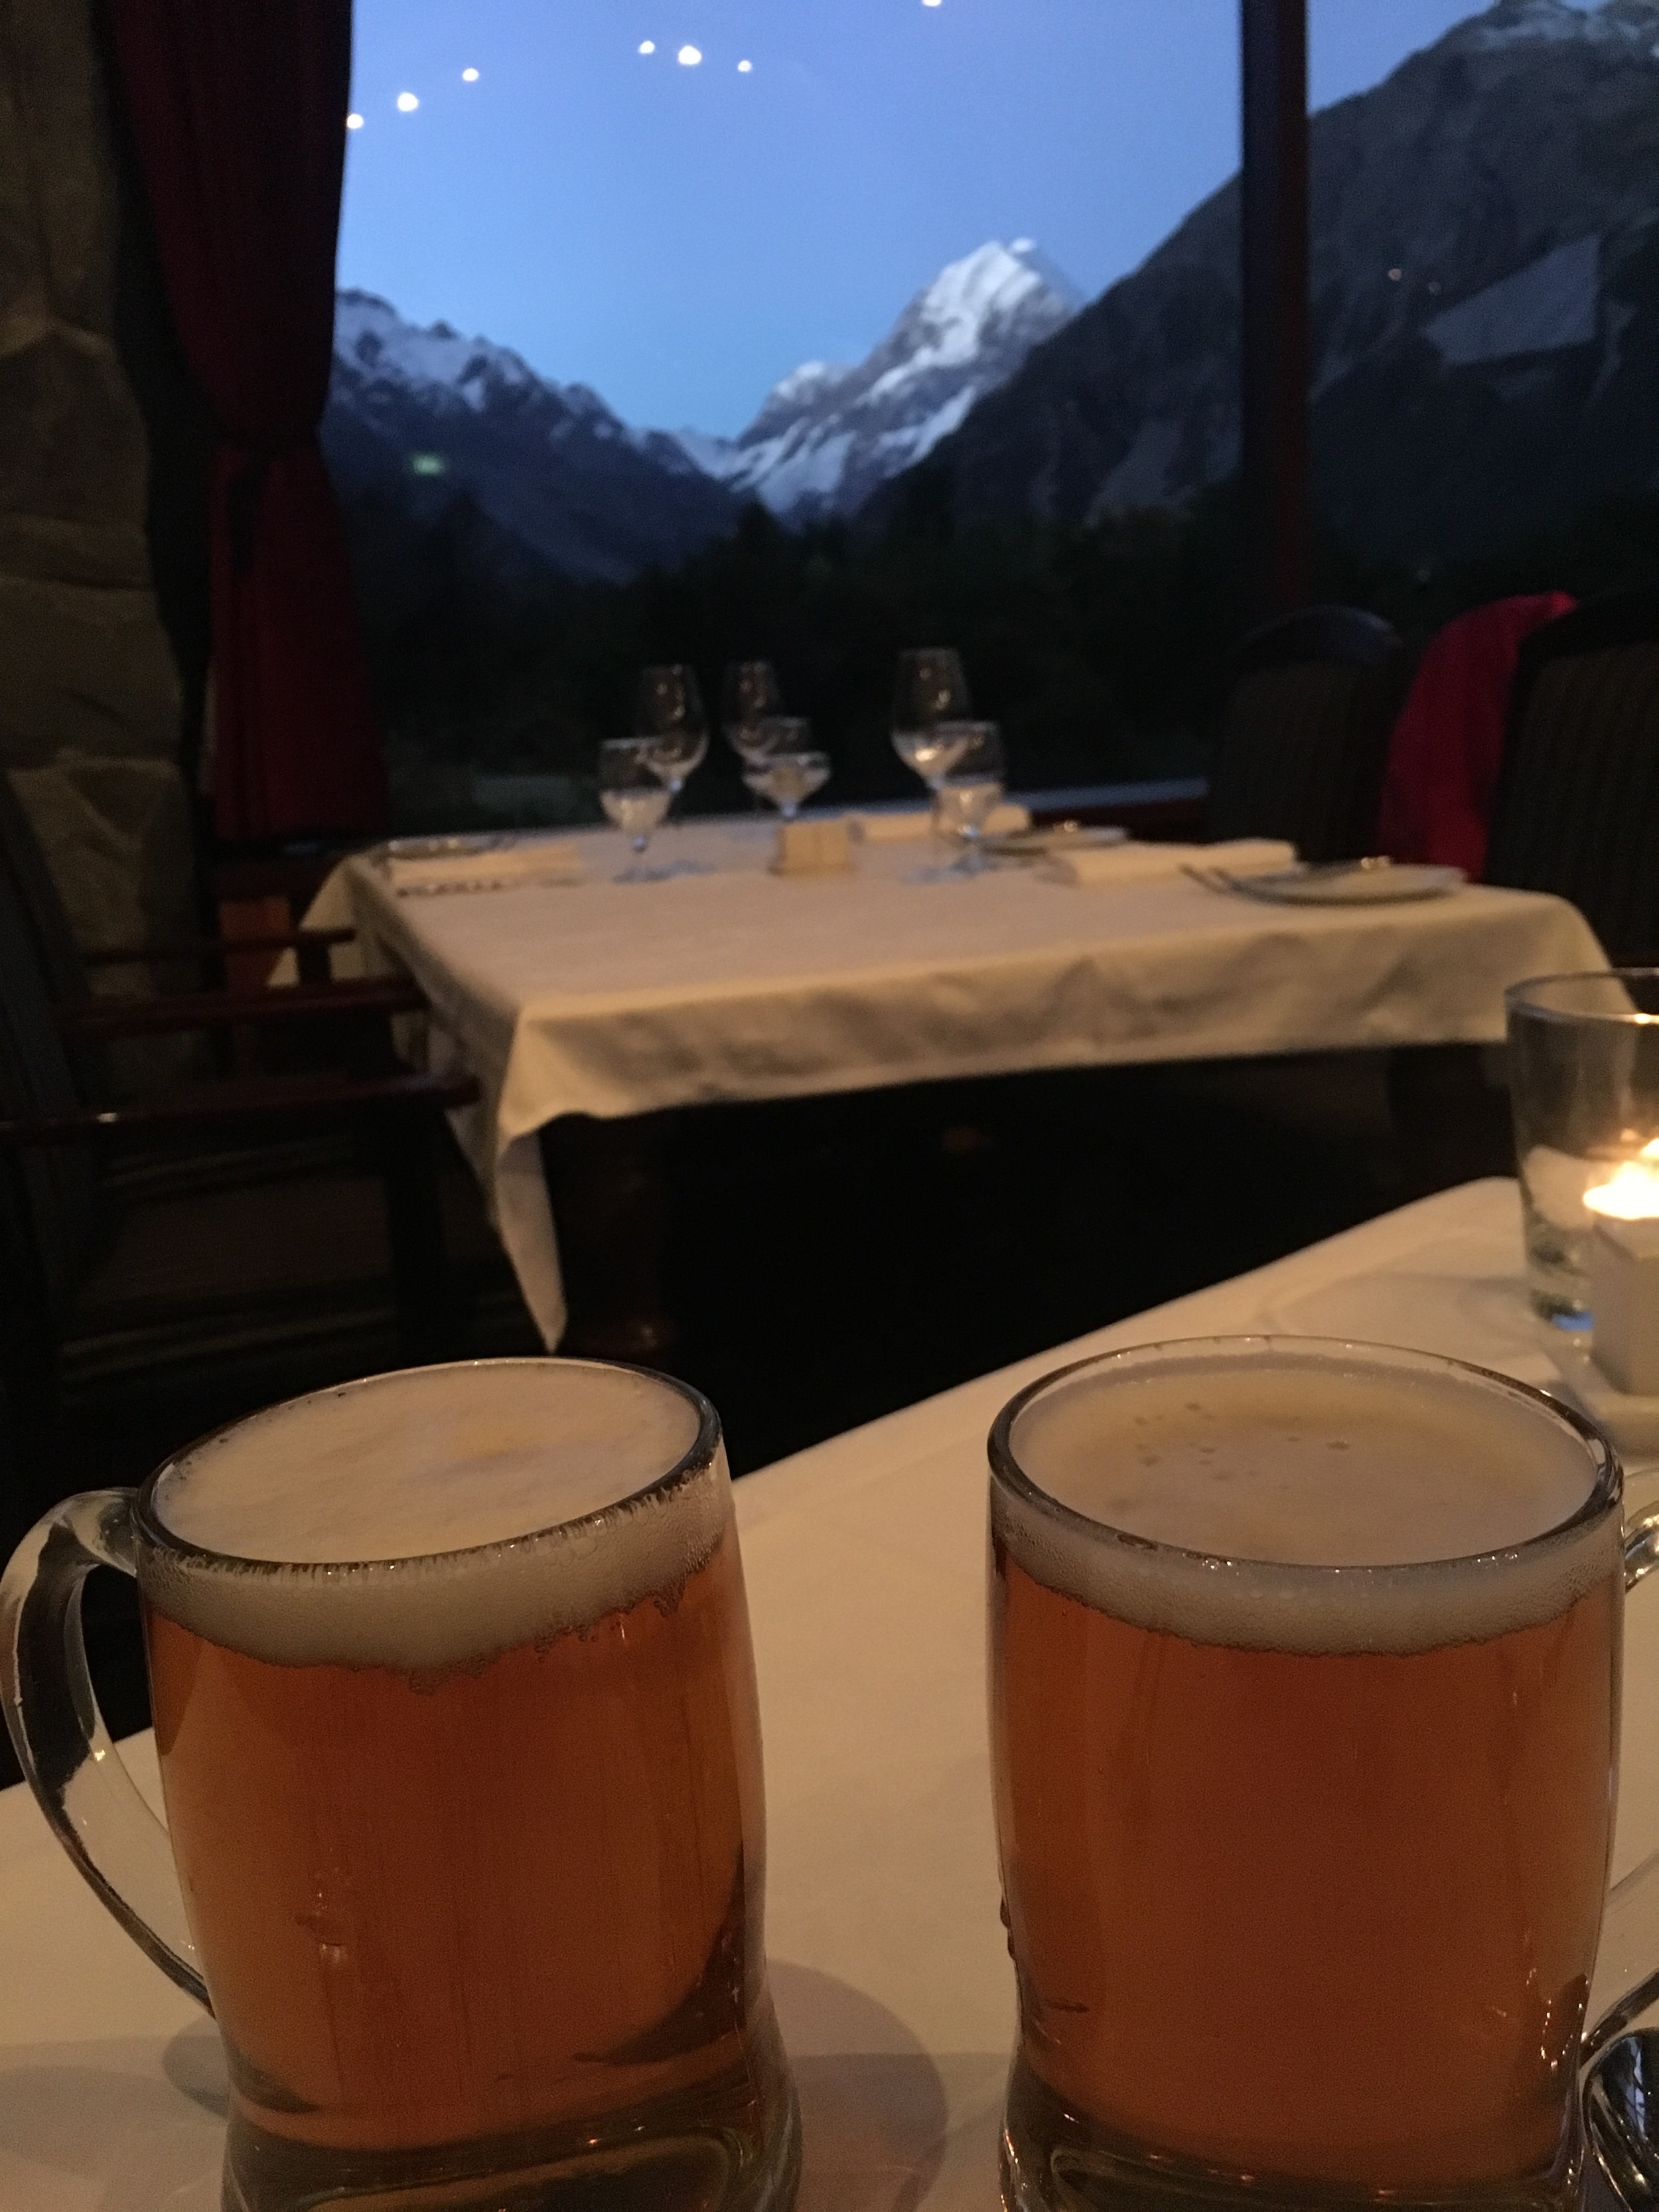 Well-deserved beers + view of Mount Cook